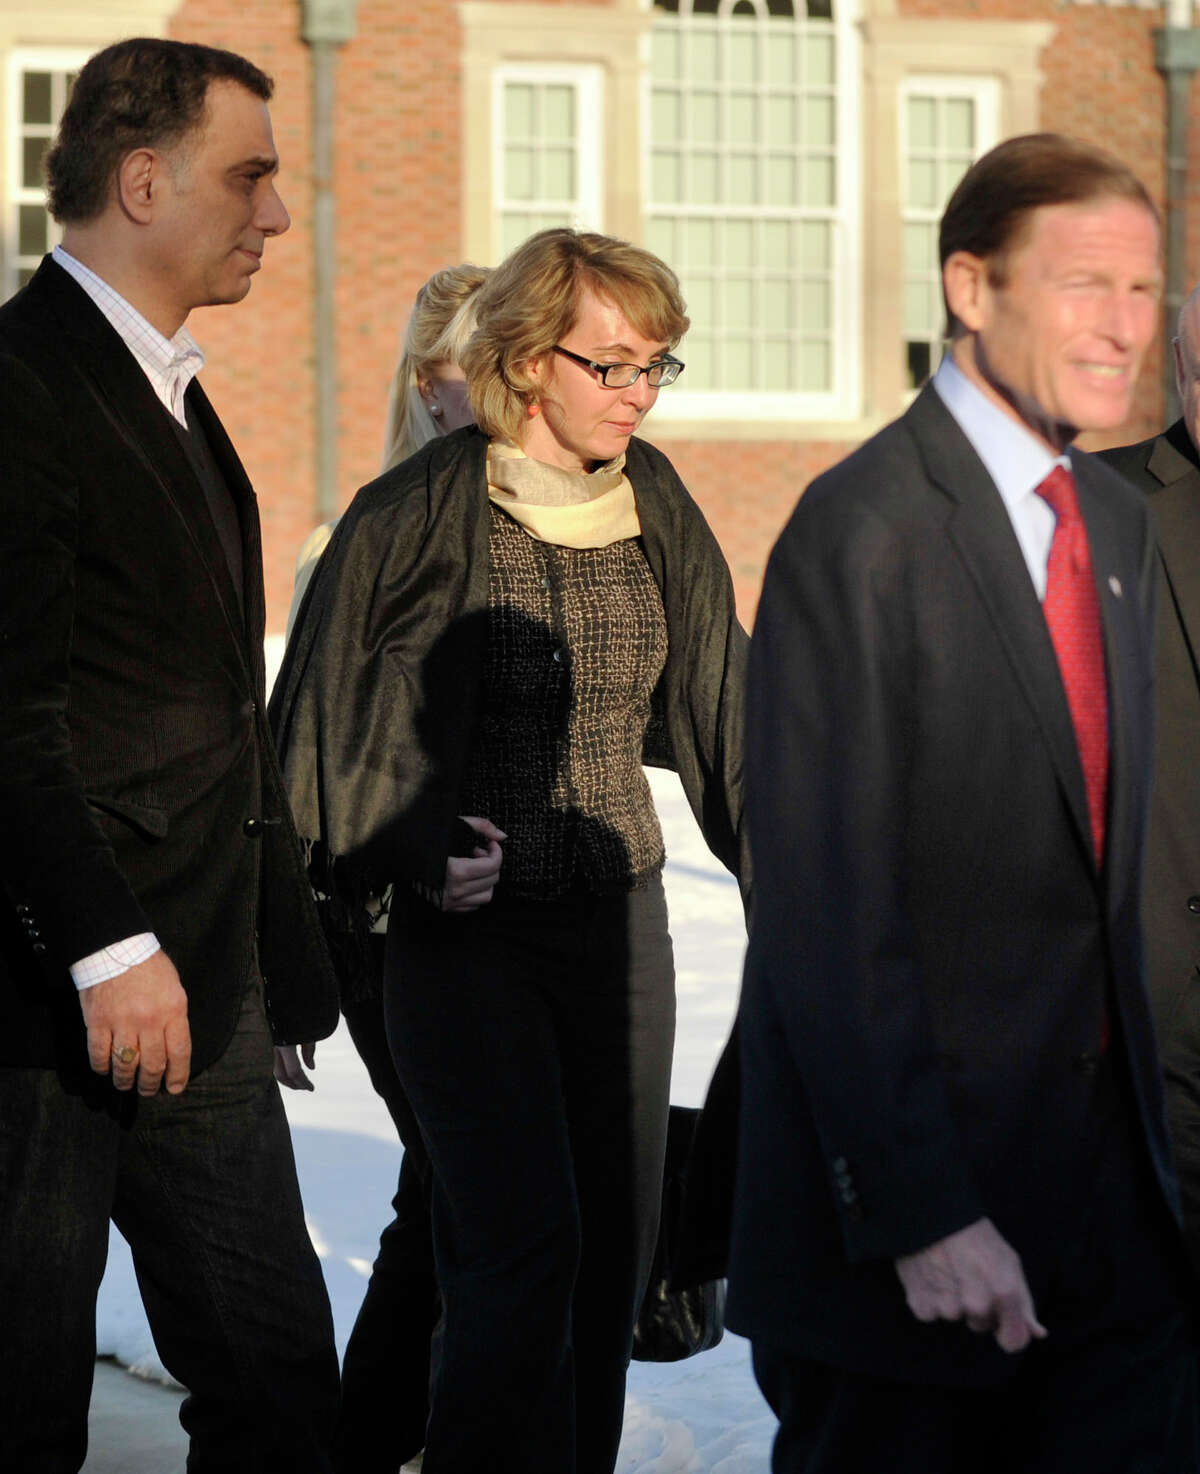 Former Congresswoman Gabrielle Giffords, center, exits Newtown Town Hall at Fairfield Hills Campus after meeting with Newtown First Selectman Pat Llodra and other officials on Friday, Jan. 4, 2013.